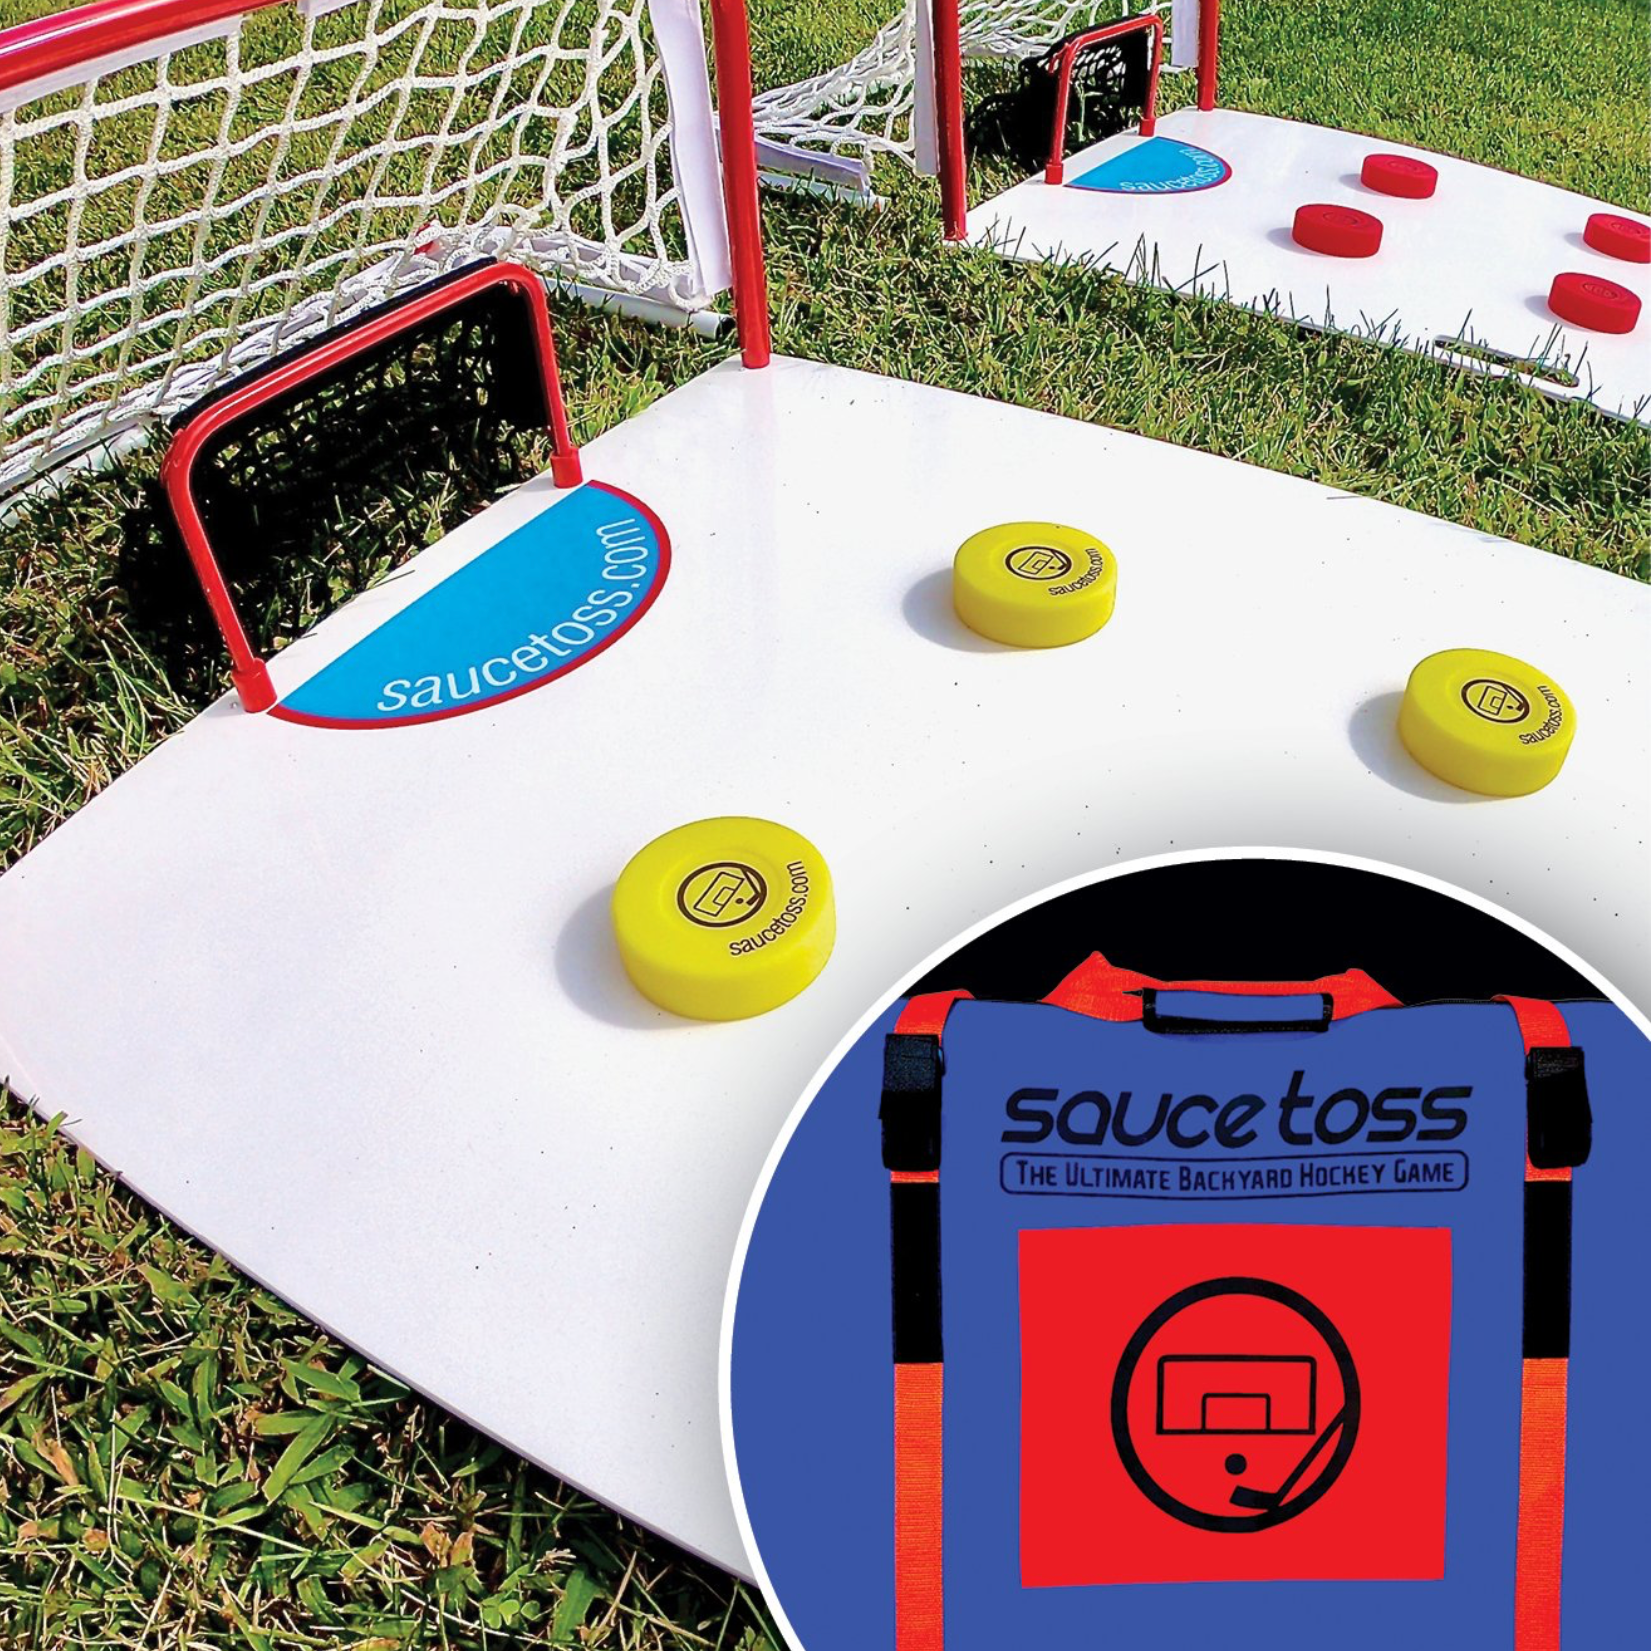 Sauce Toss Boards in grass with the Travel Bag